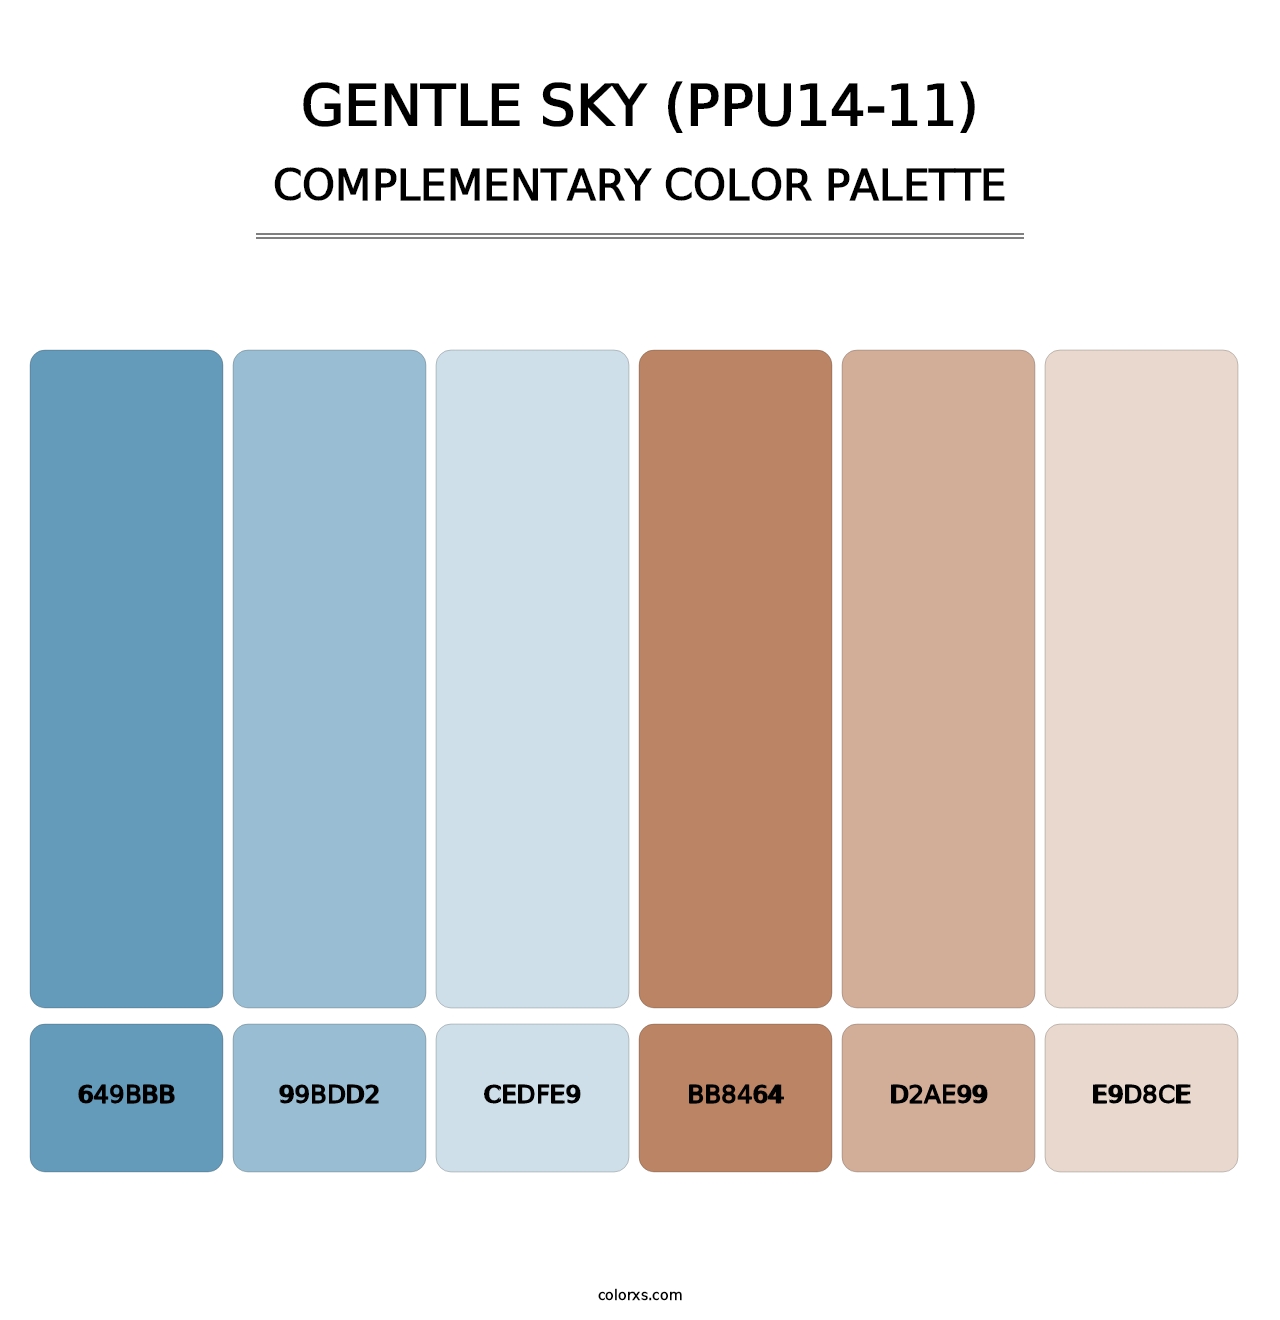 Gentle Sky (PPU14-11) - Complementary Color Palette